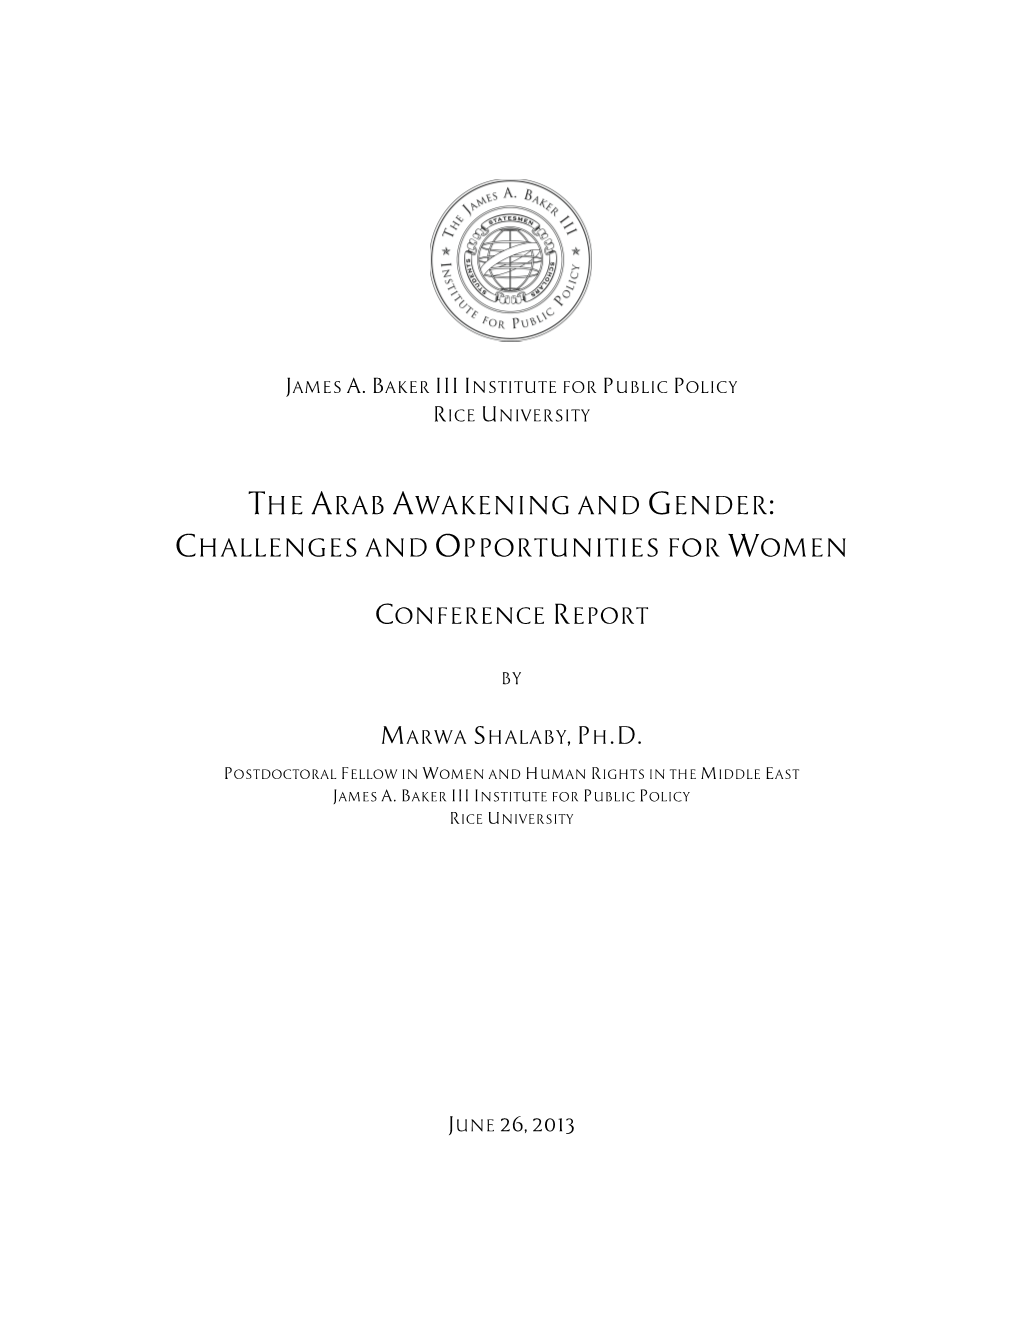 The Arab Awakening and Gender: Challenges and Opportunities for Women